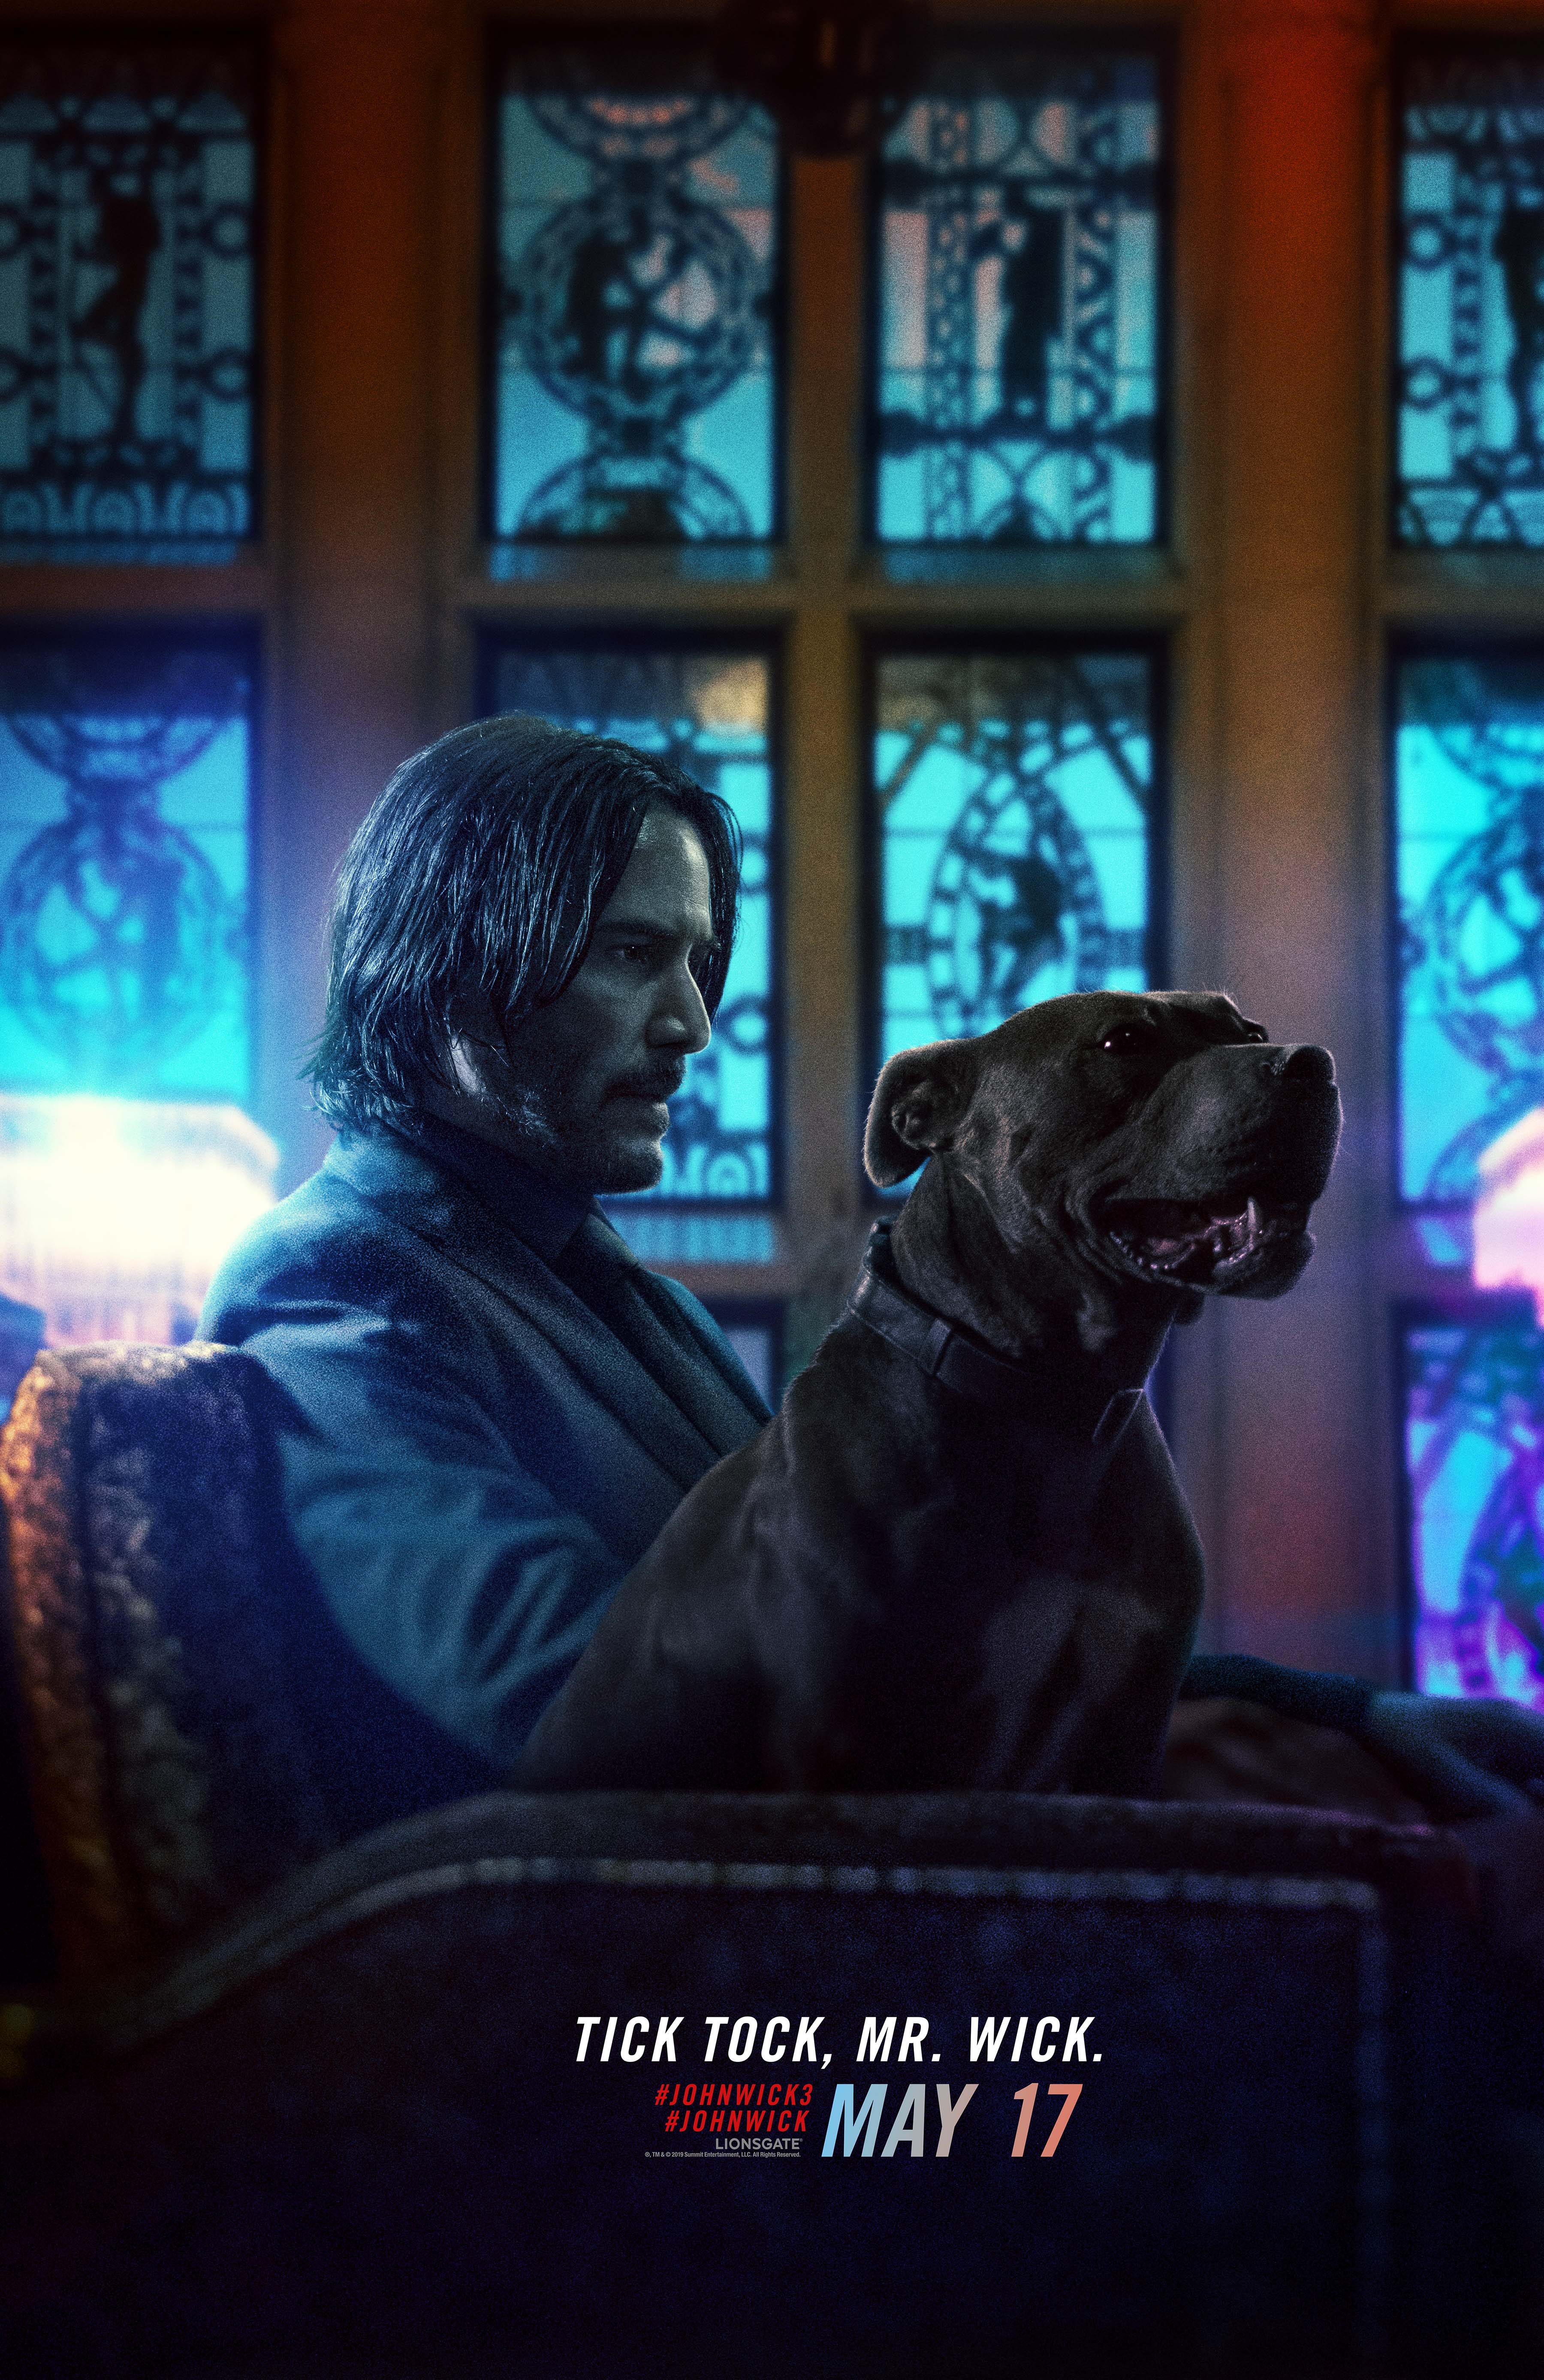 New John Wick 3 Trailer Has Halle Berry's Dogs Going For The Crotch